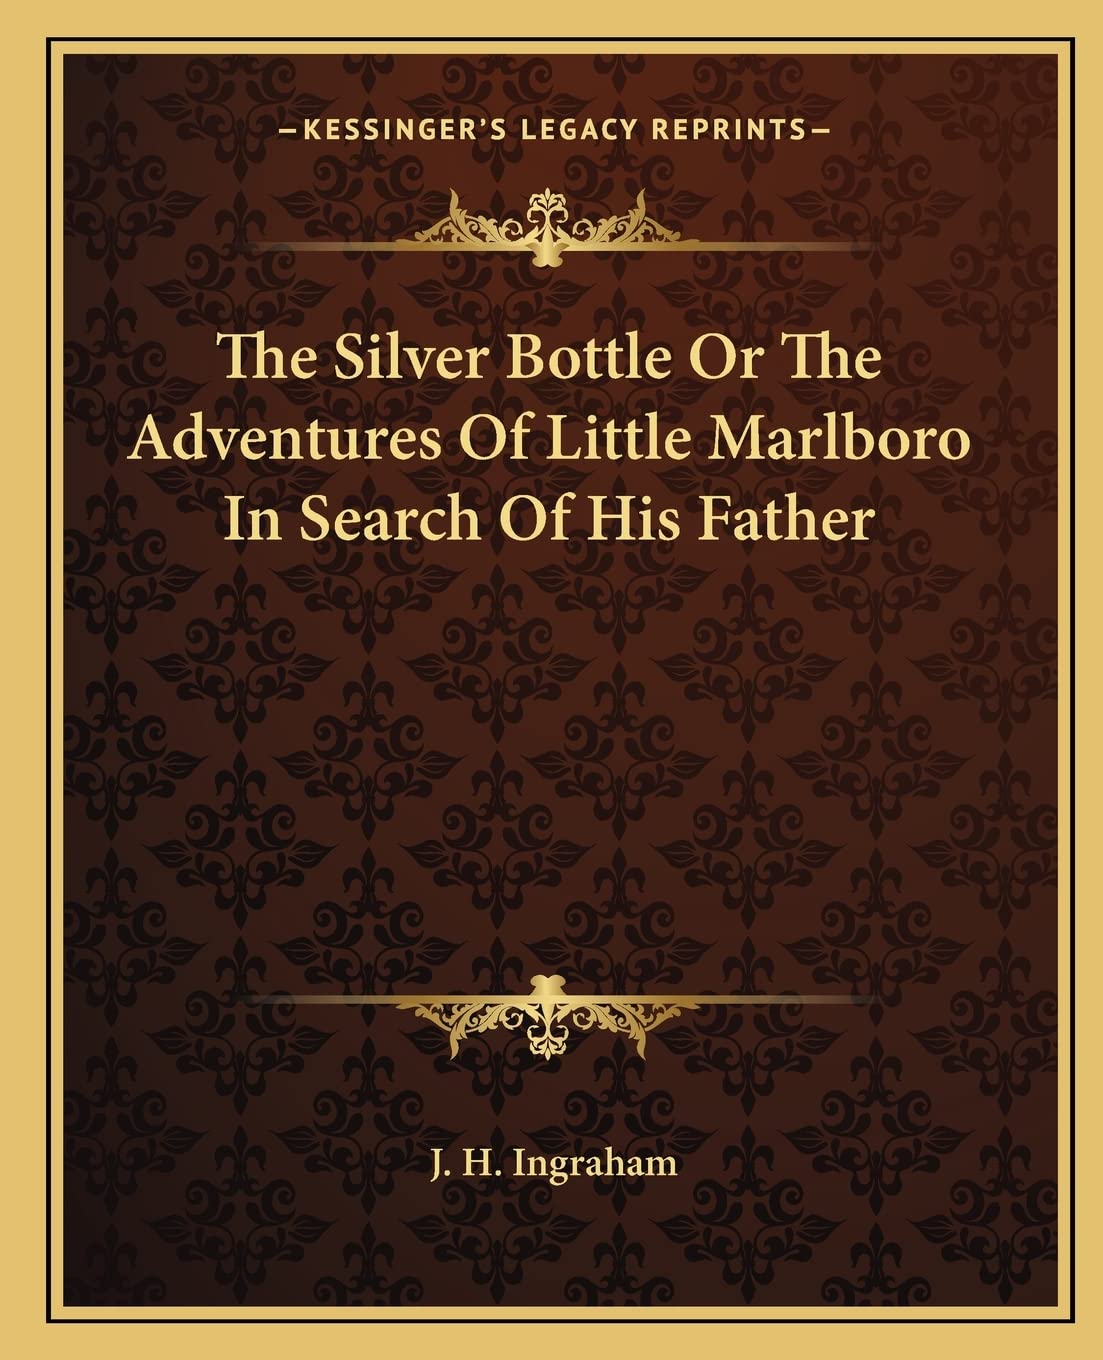 The Silver Bottle Or The Adventures Of Little Marlboro In Search Of His Father